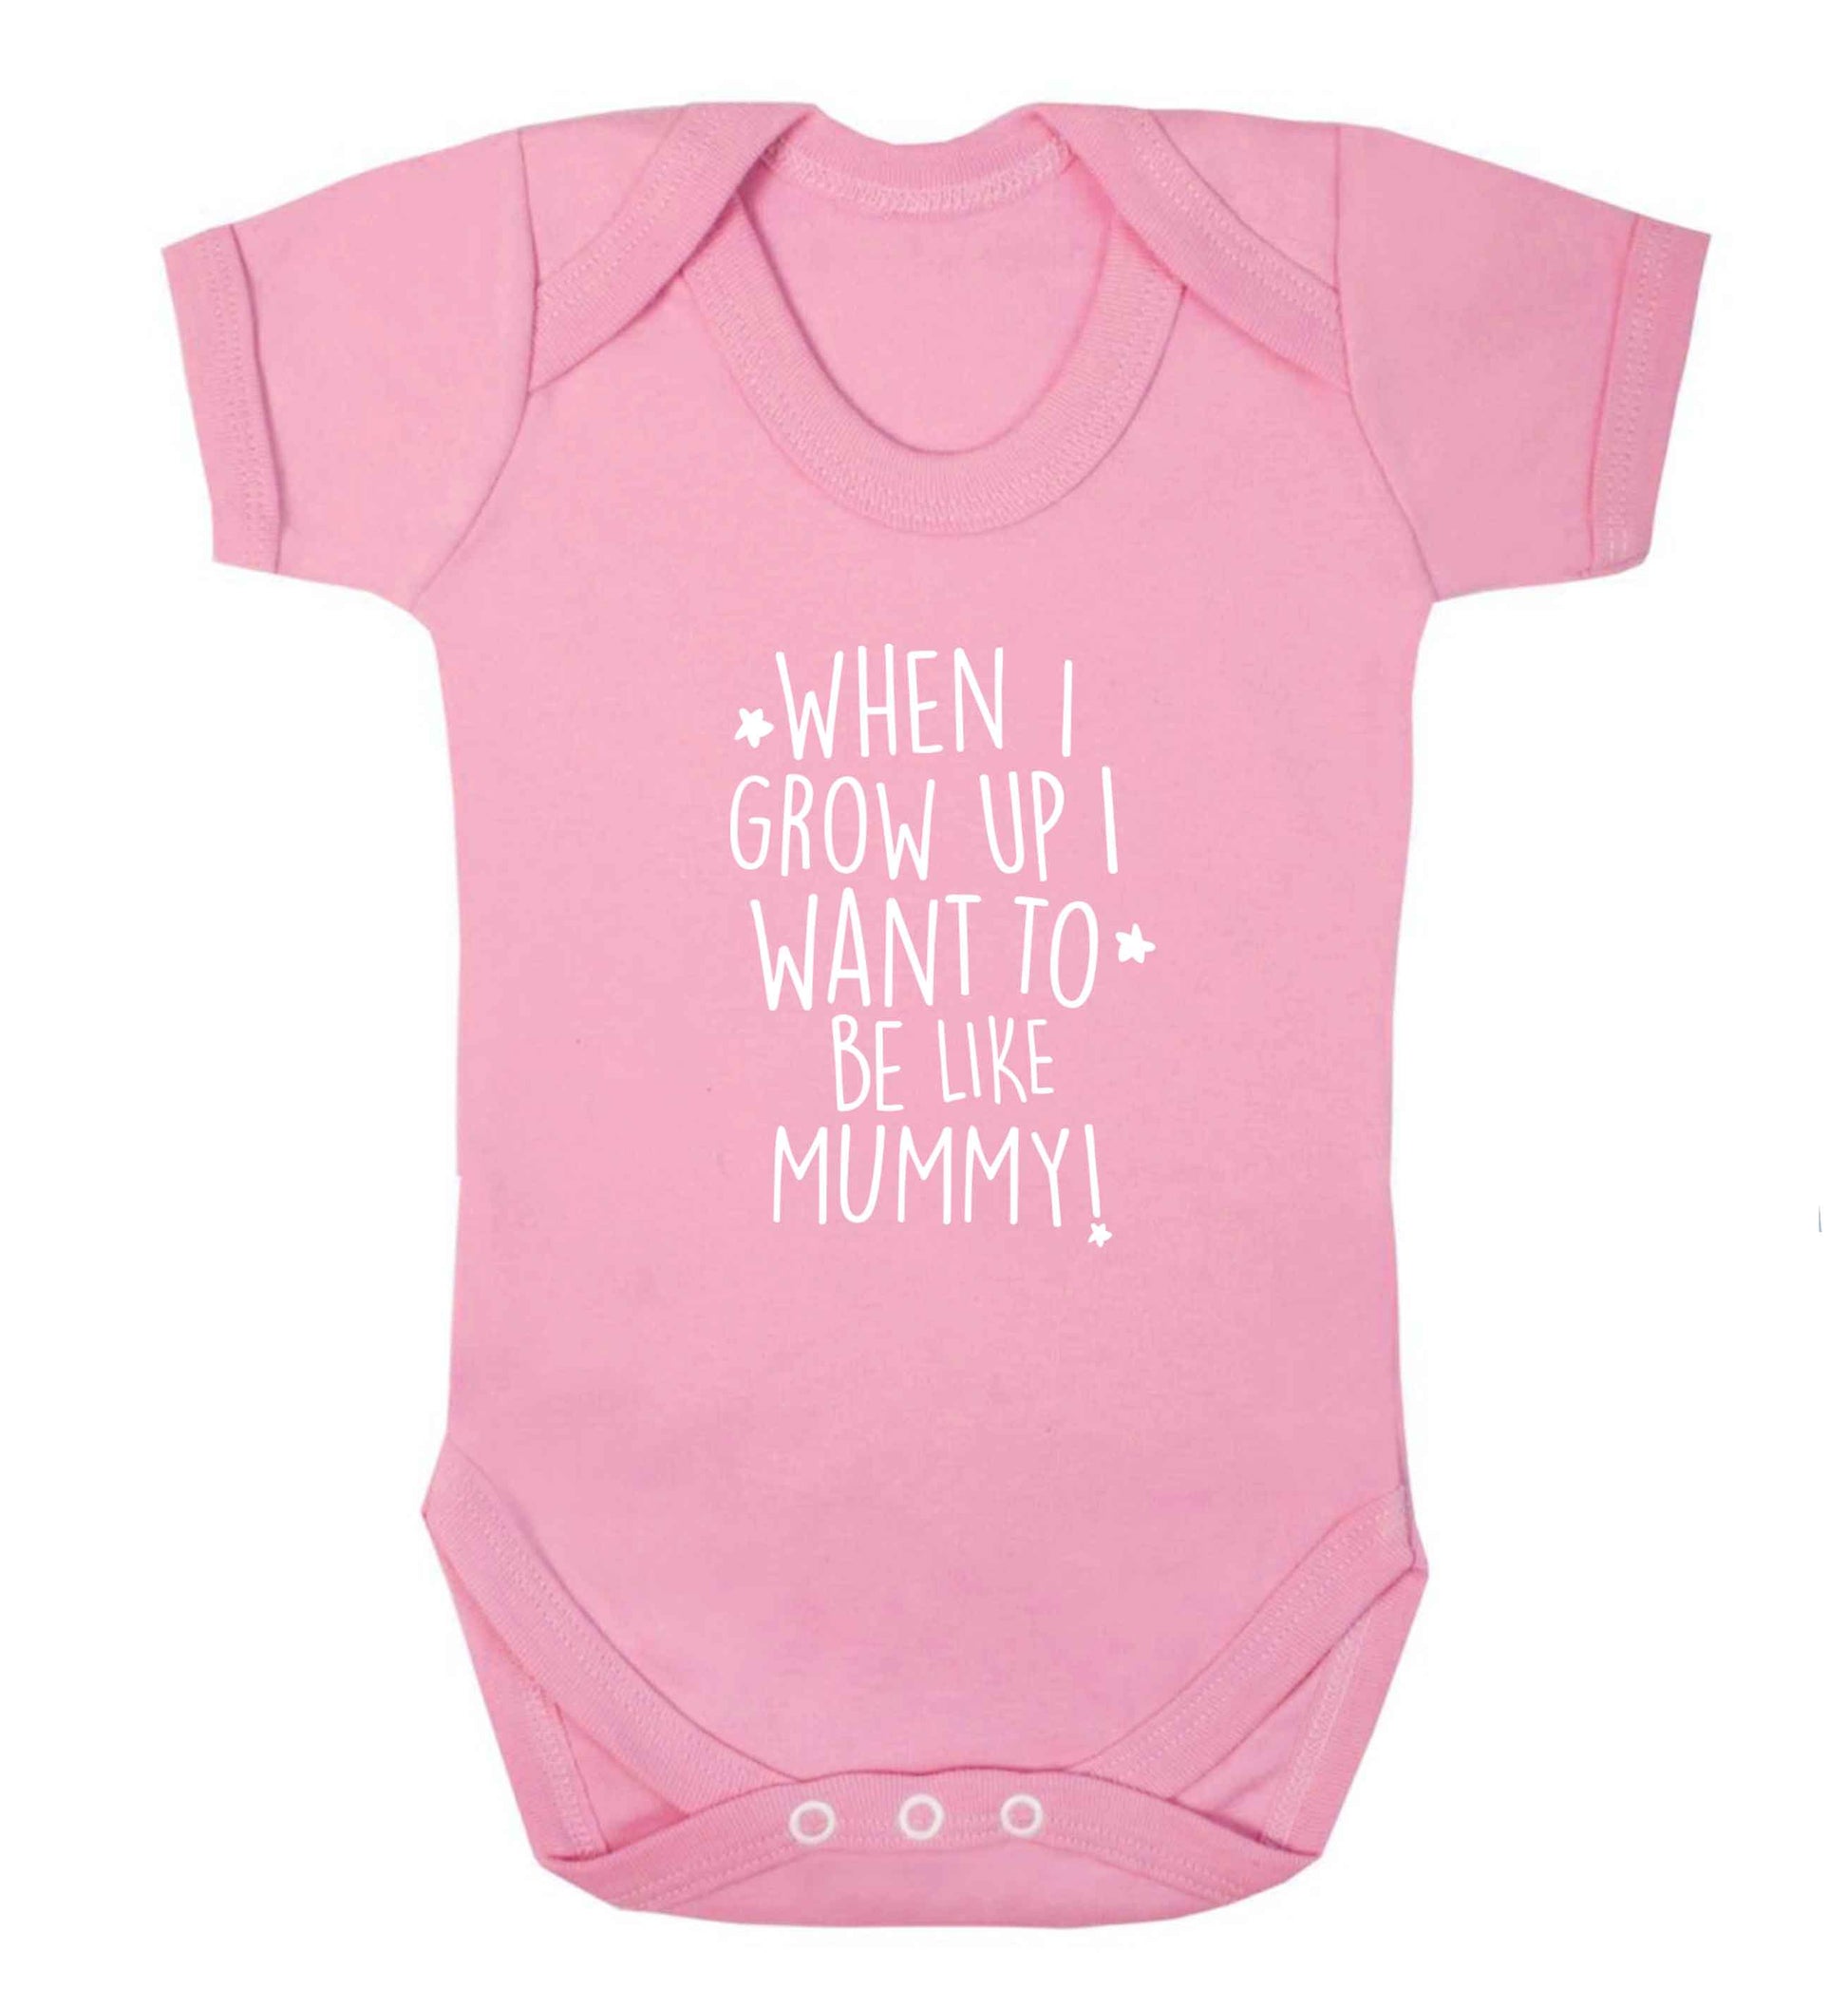 When I grow up I want to be like my mummy baby vest pale pink 18-24 months